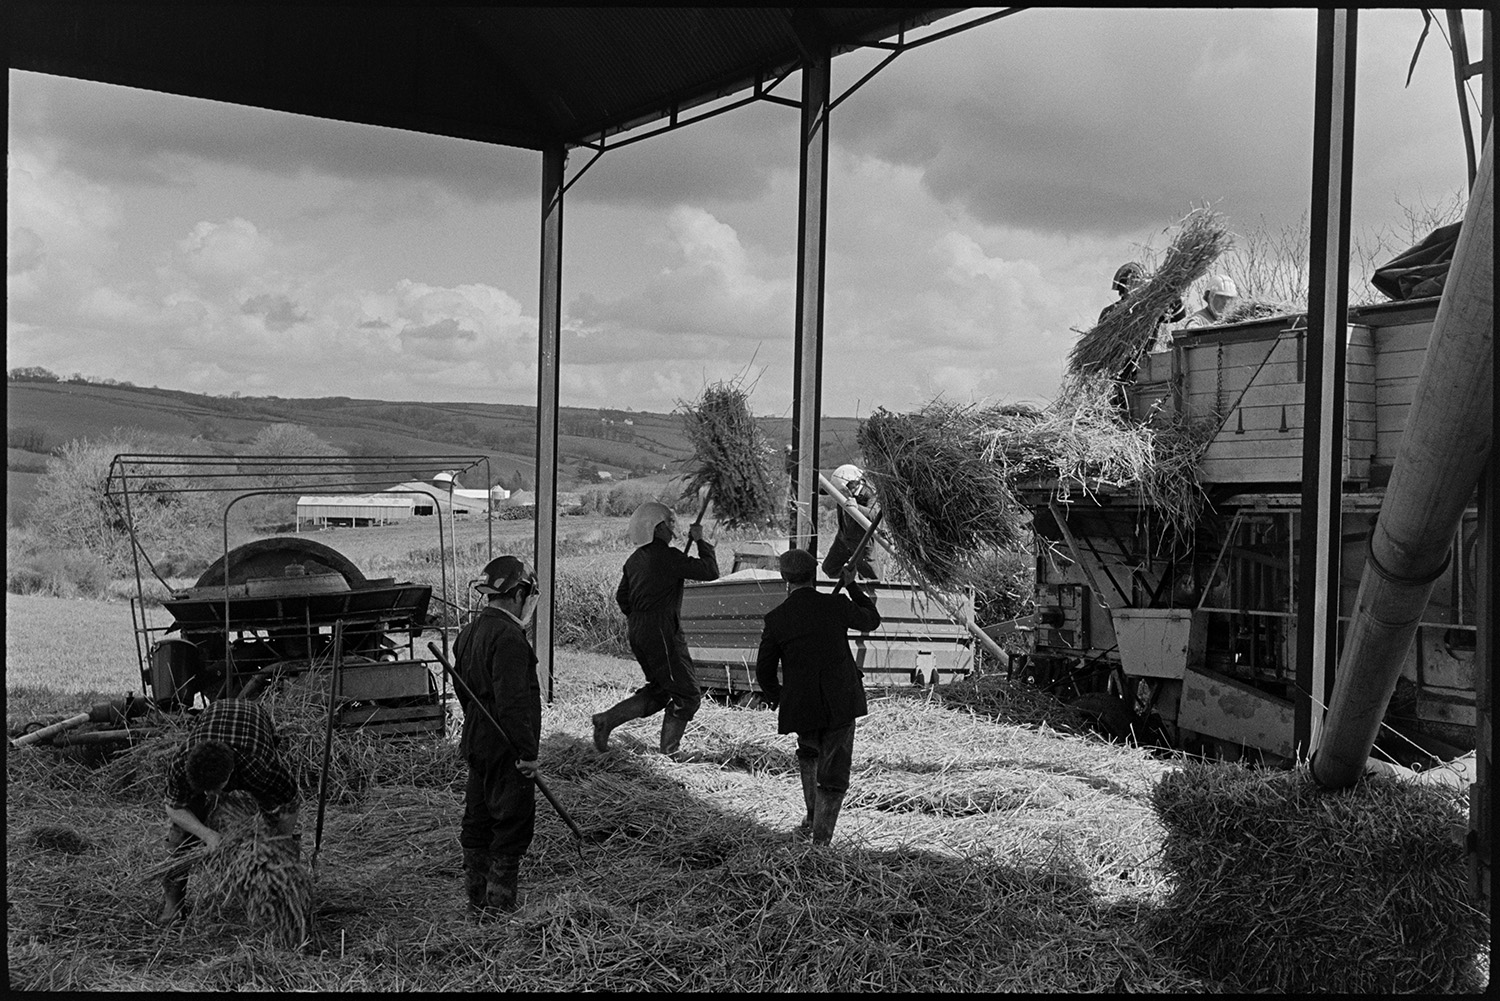 Reedcombers working from barn, loading reed comber.
[Men working inside a barn loading reed into a threshing machine or reed comber at Spittle Farm, near Chulmleigh. Five men are wearing helmets or visors and they are carrying the reed using pitchforks. A trailer collecting the grain is alongside the threshing machine. Farm buildings and fields are visible in the background.]